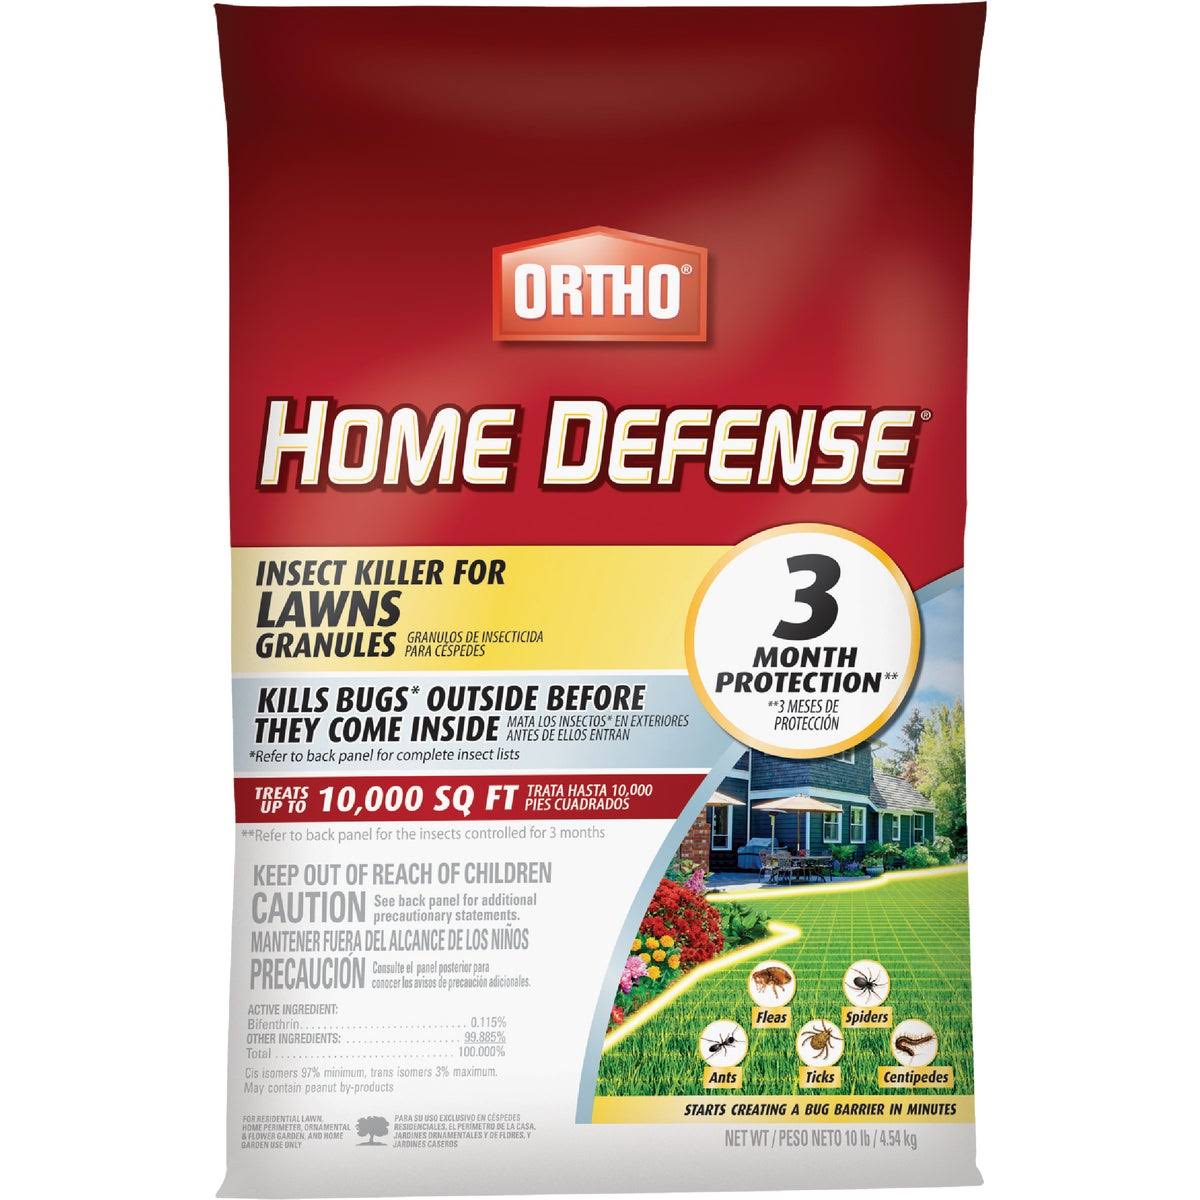 Ortho Home Defense Insect Killer for Lawns Granules - 10lb